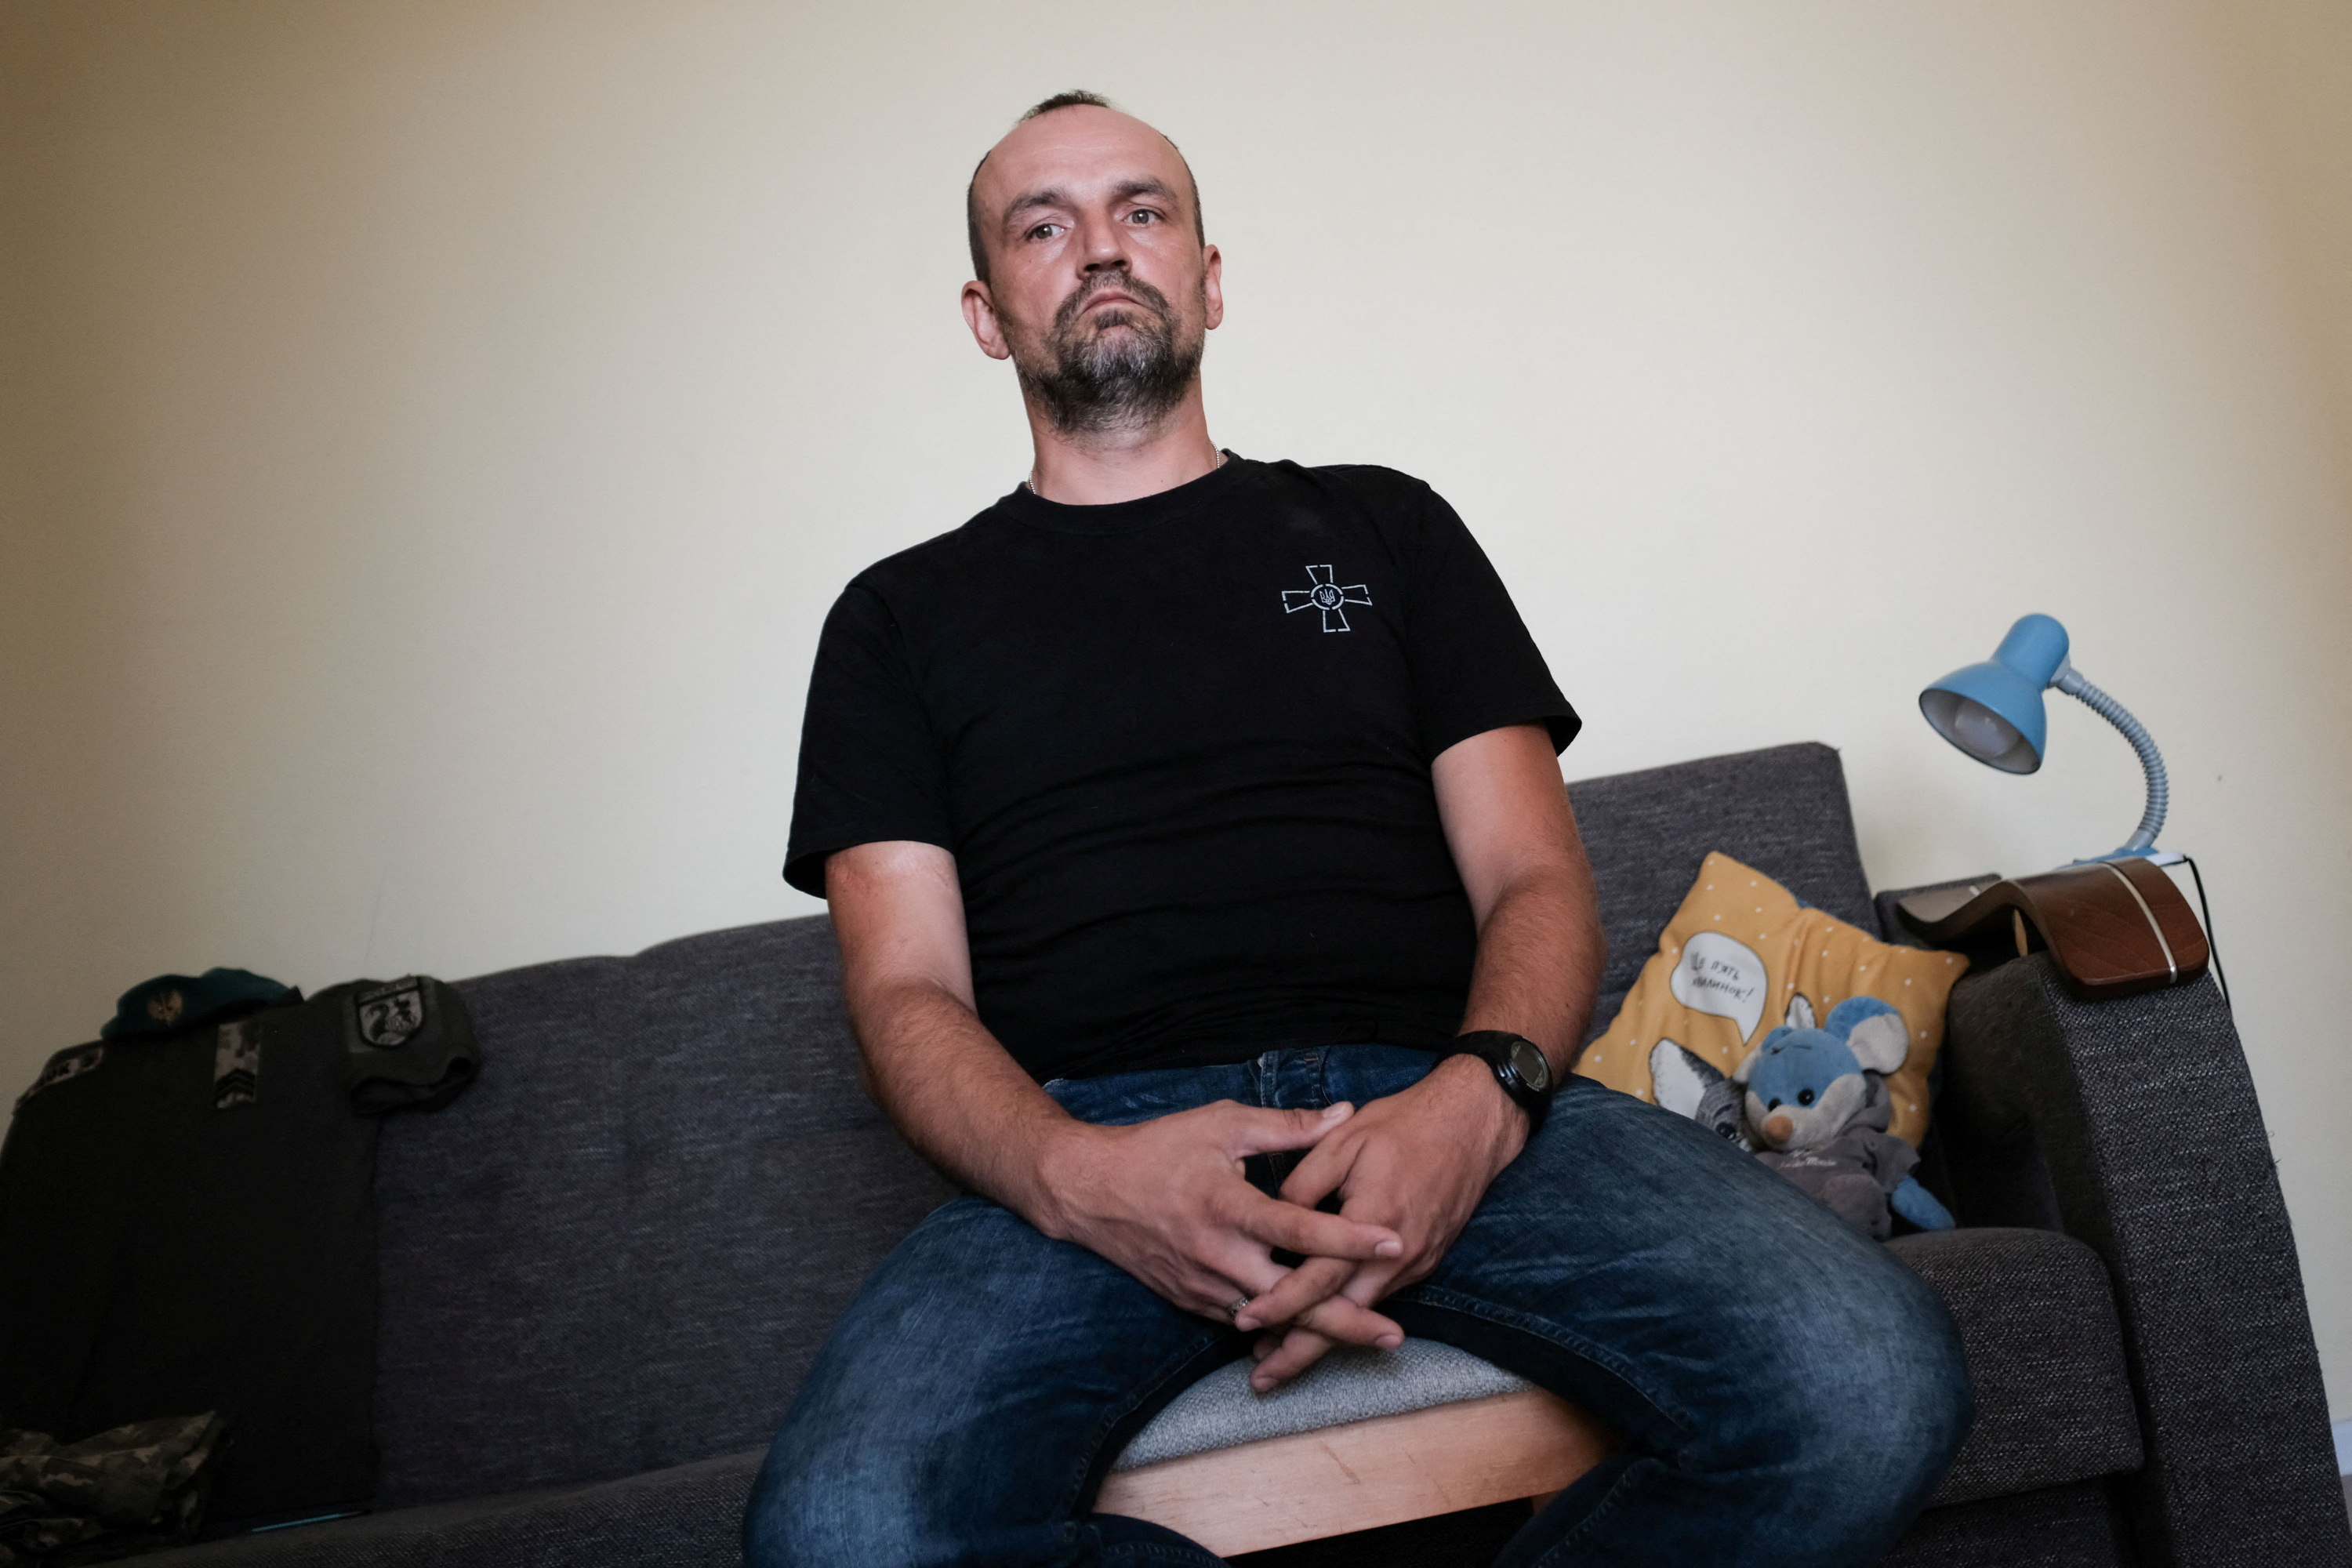 Ukrainian soldier Dovzhenko, 41 looks on during an interview for Reuters at his home in Wroclaw